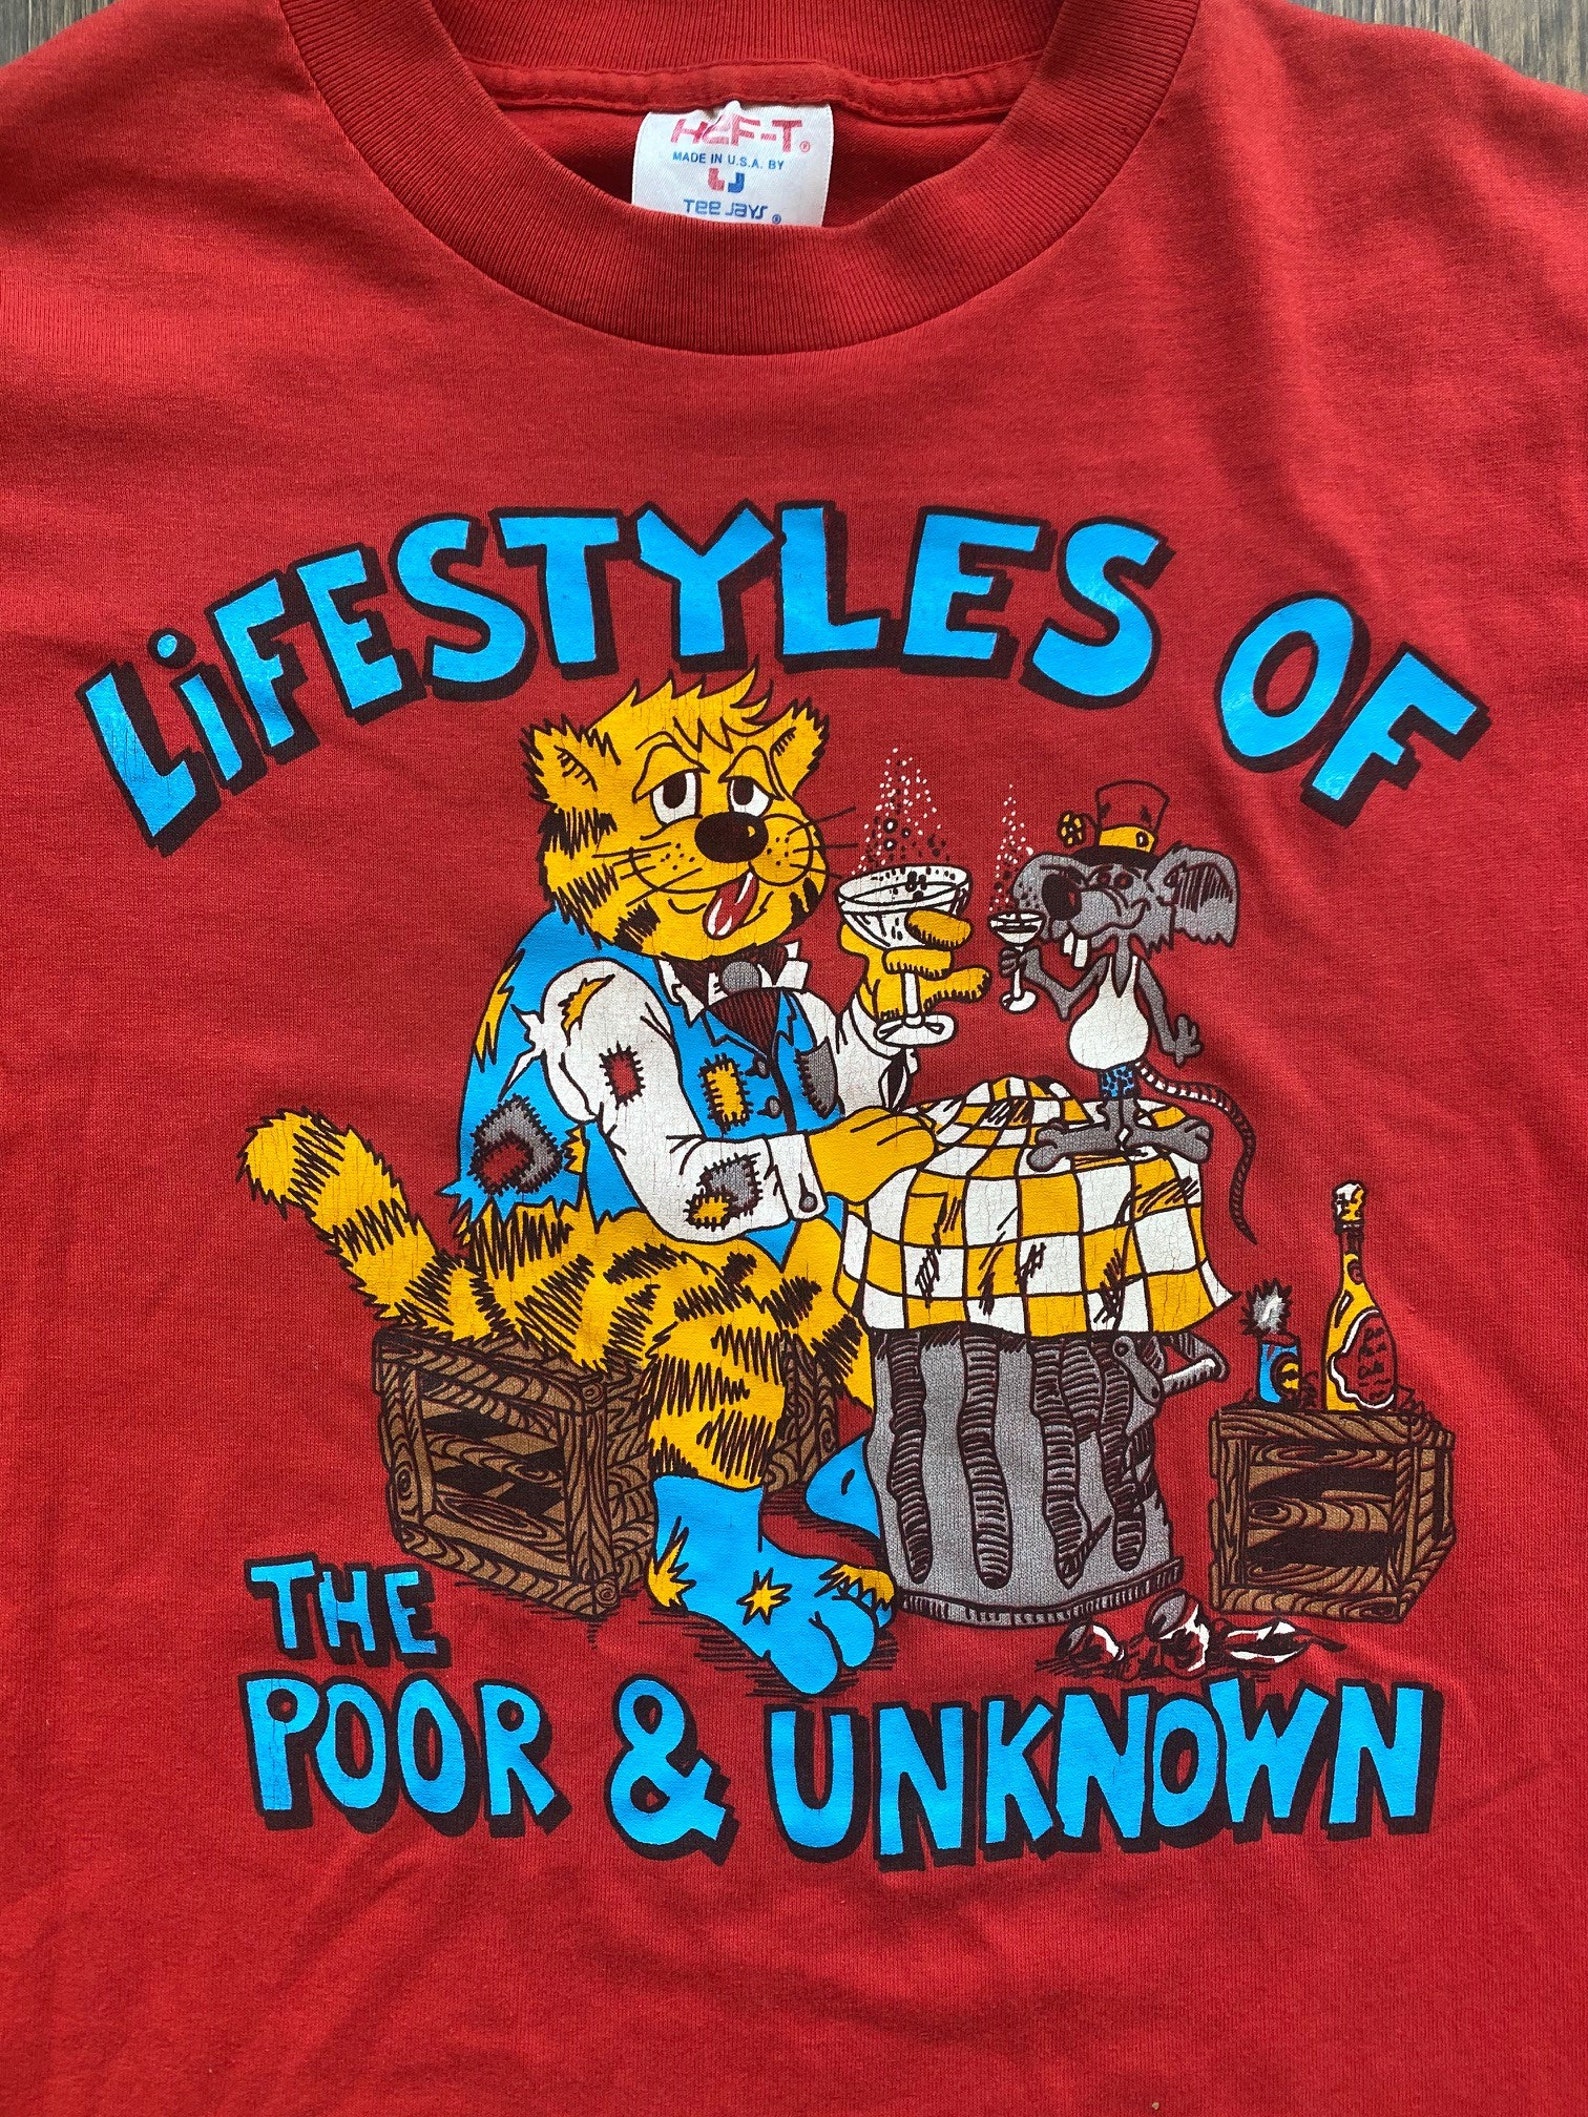 Lifestyles of the Poor & Unknown red t-shirt vintage retro | Etsy